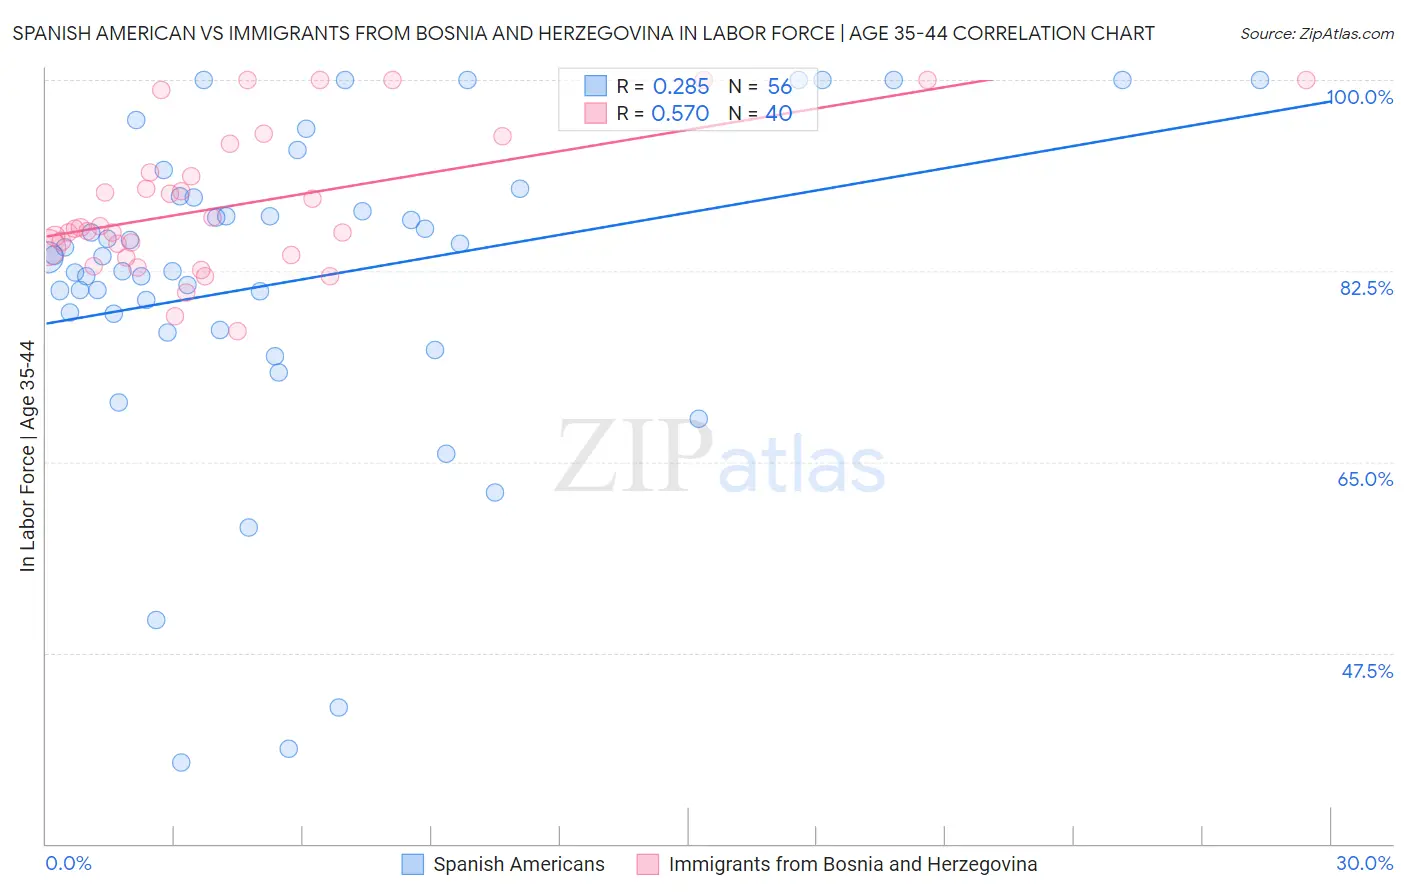 Spanish American vs Immigrants from Bosnia and Herzegovina In Labor Force | Age 35-44